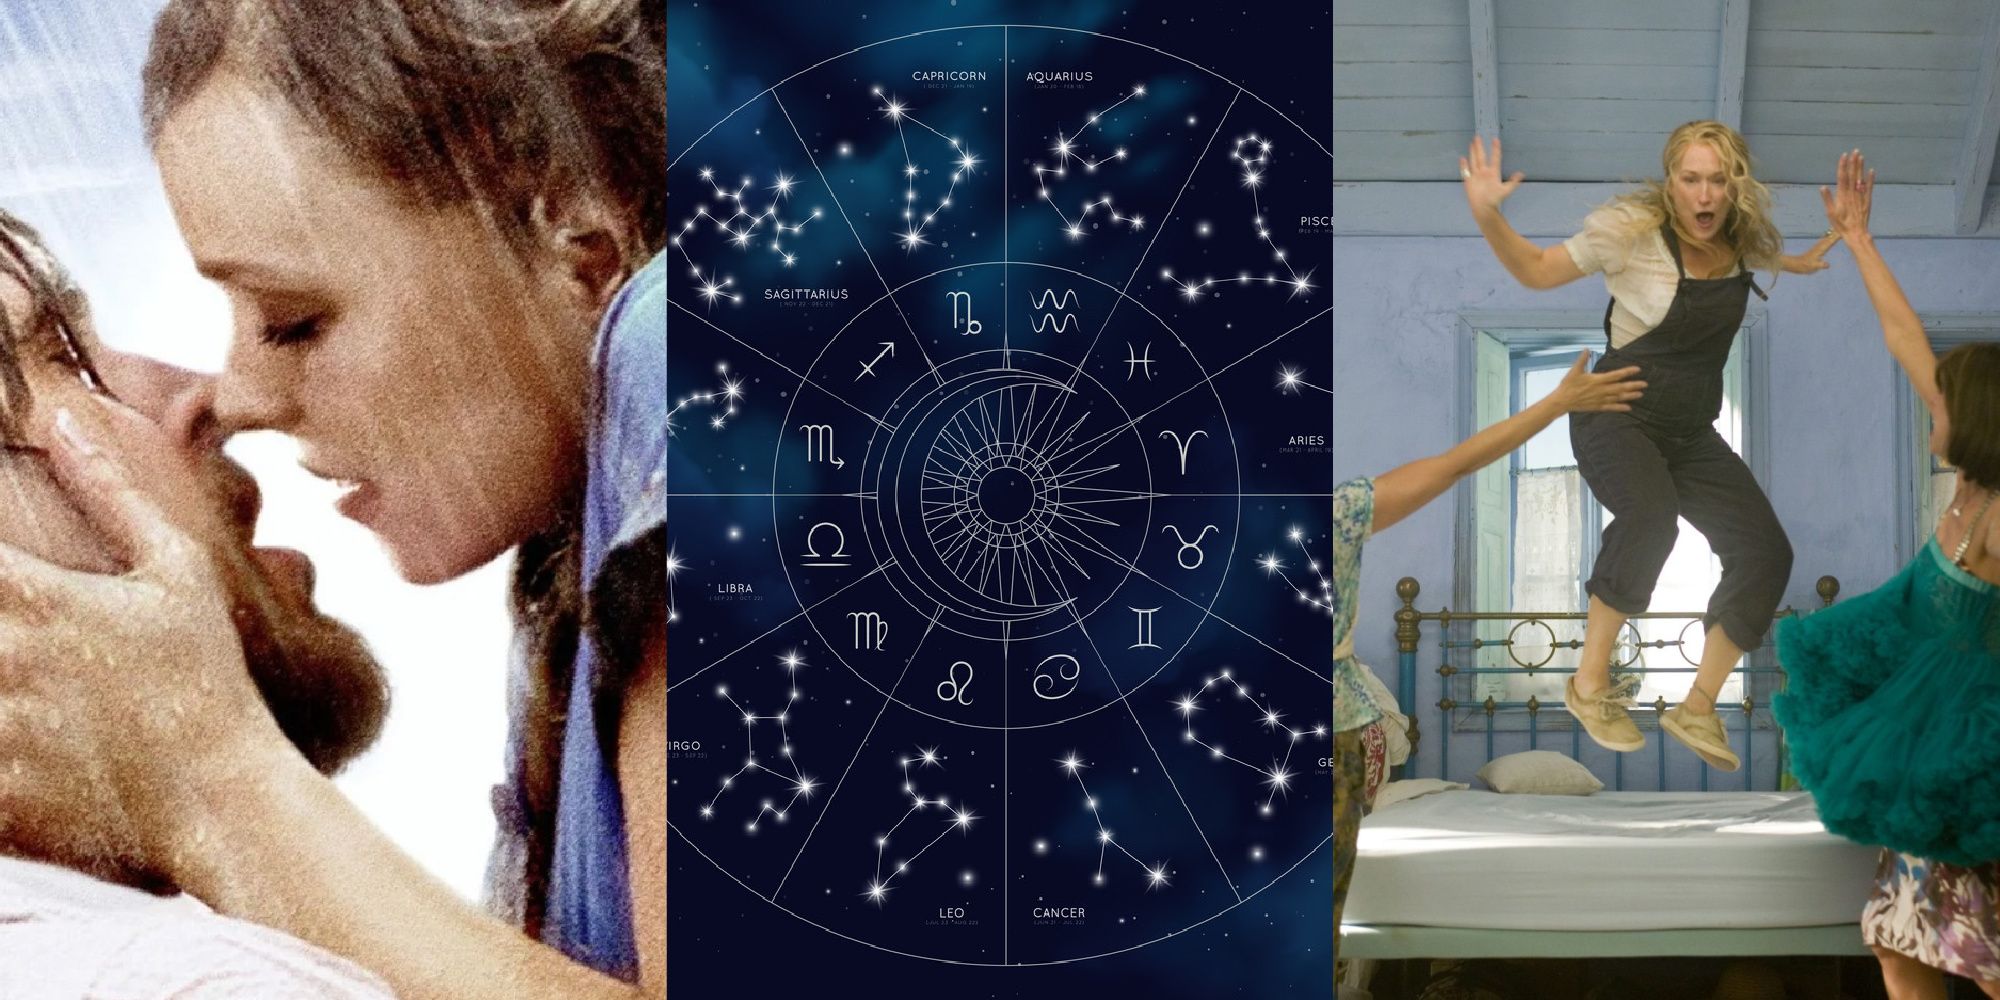 What to Stream Based on Your Zodiac Sign